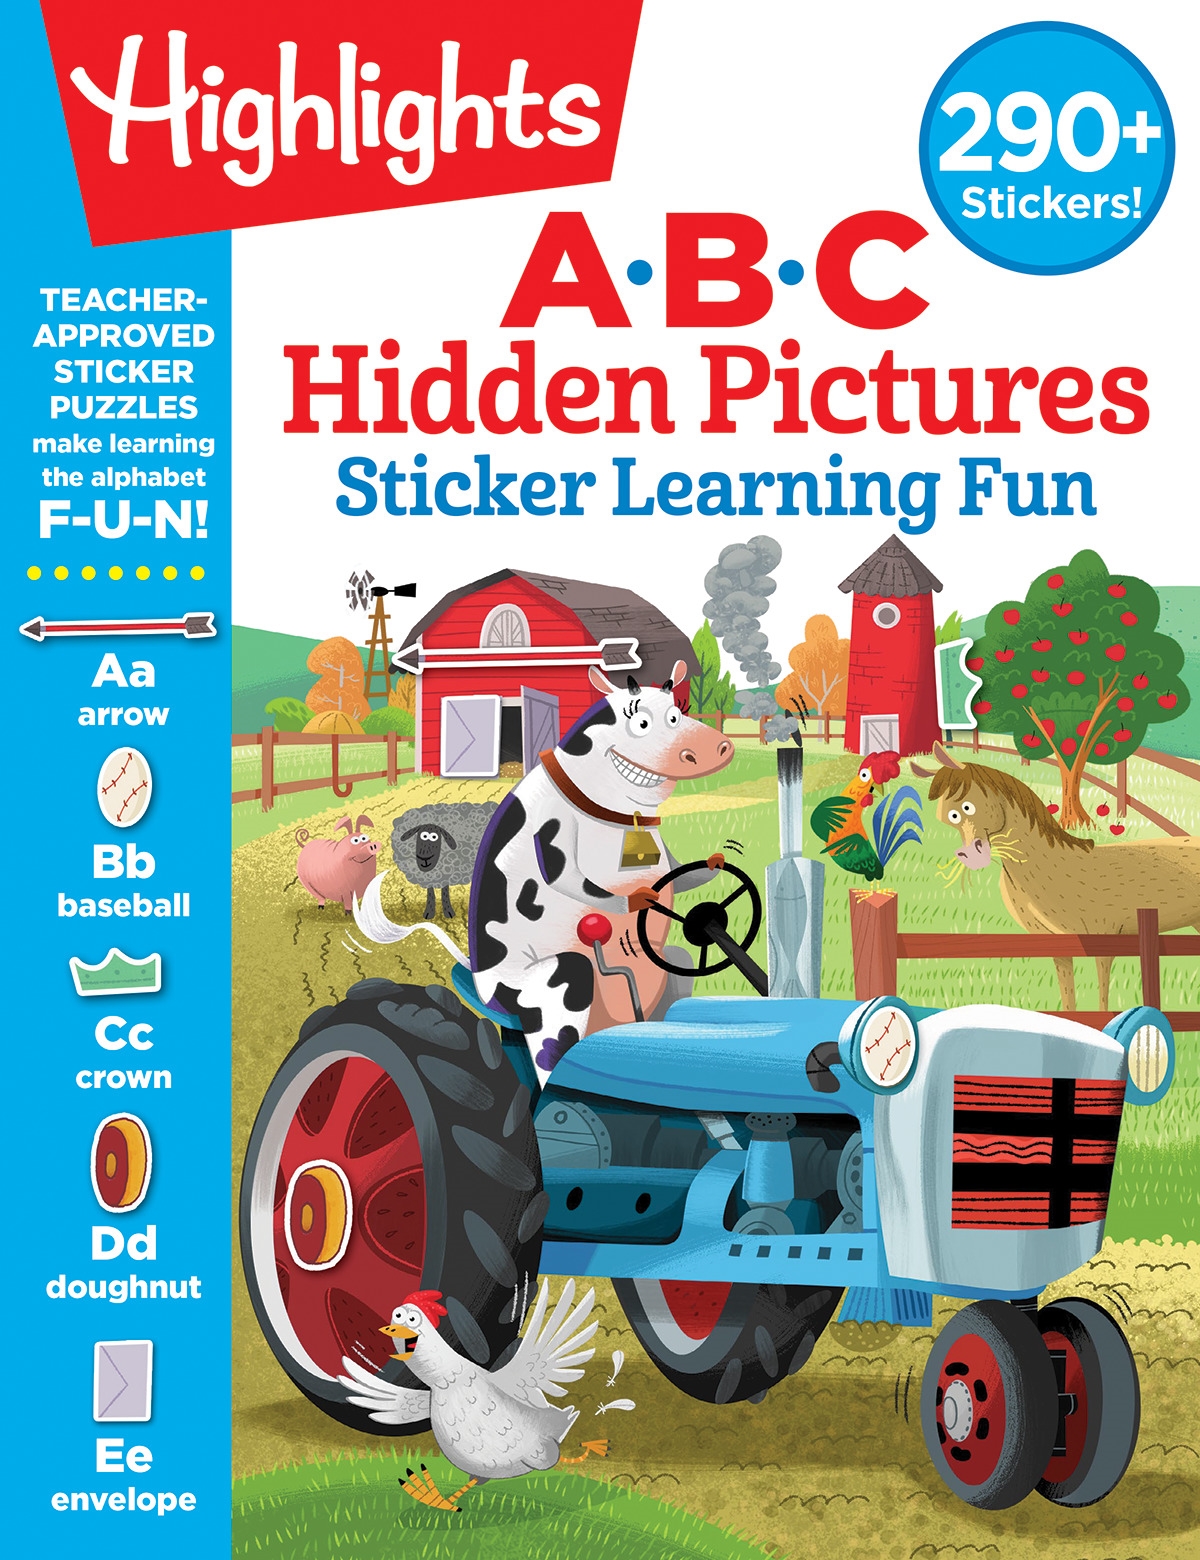 ABC Hidden Pictures Sticker Learning Fun by Highlights Learning ...